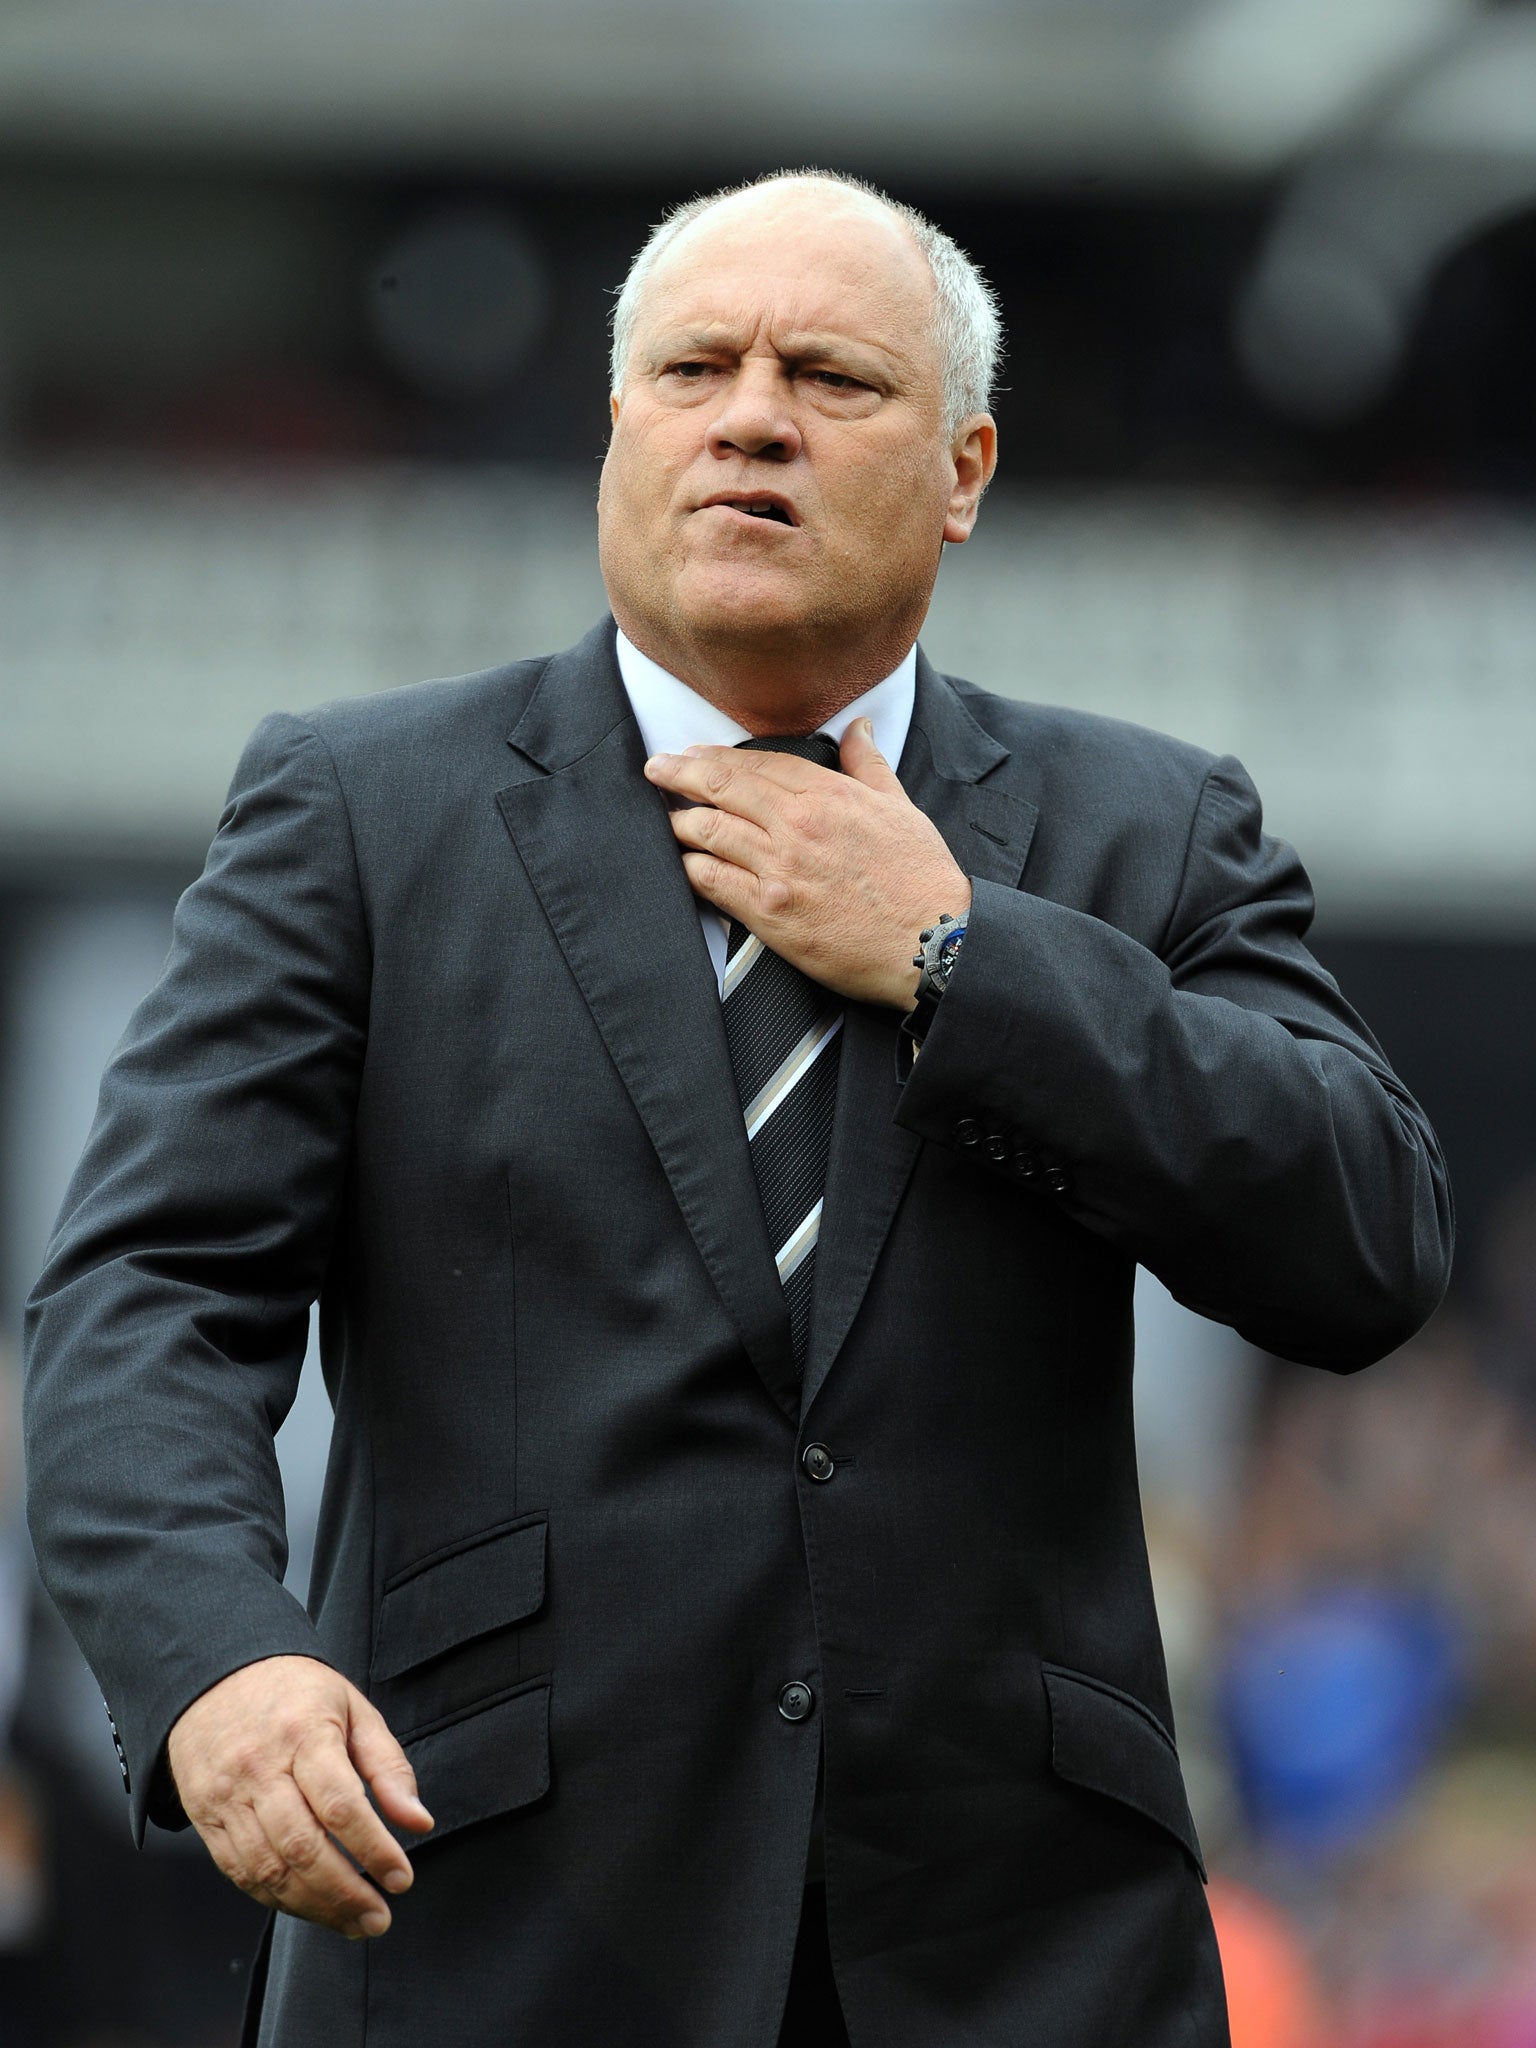 Fulham were booed off after conceding an injury-time equaliser to West Bromwich Albion, with Martin Jol subjected to chants of 'Jol out'